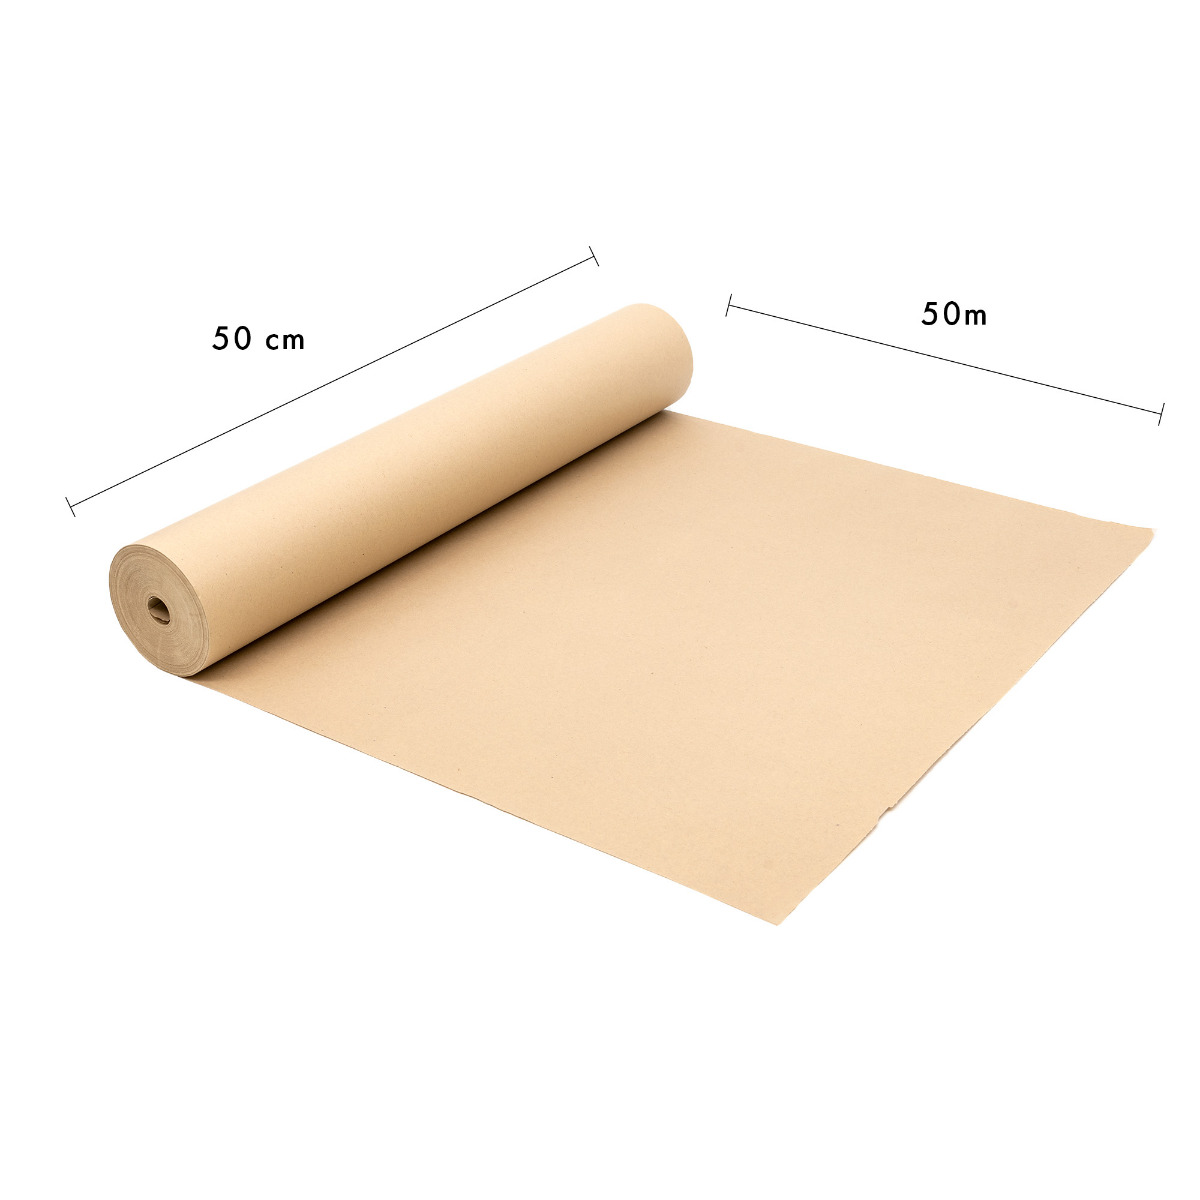 Wod Tape Brown Kraft Paper Roll - 24 inch x 1000 Feet - Made in USA for Packaging Moving Storage Kpn-40